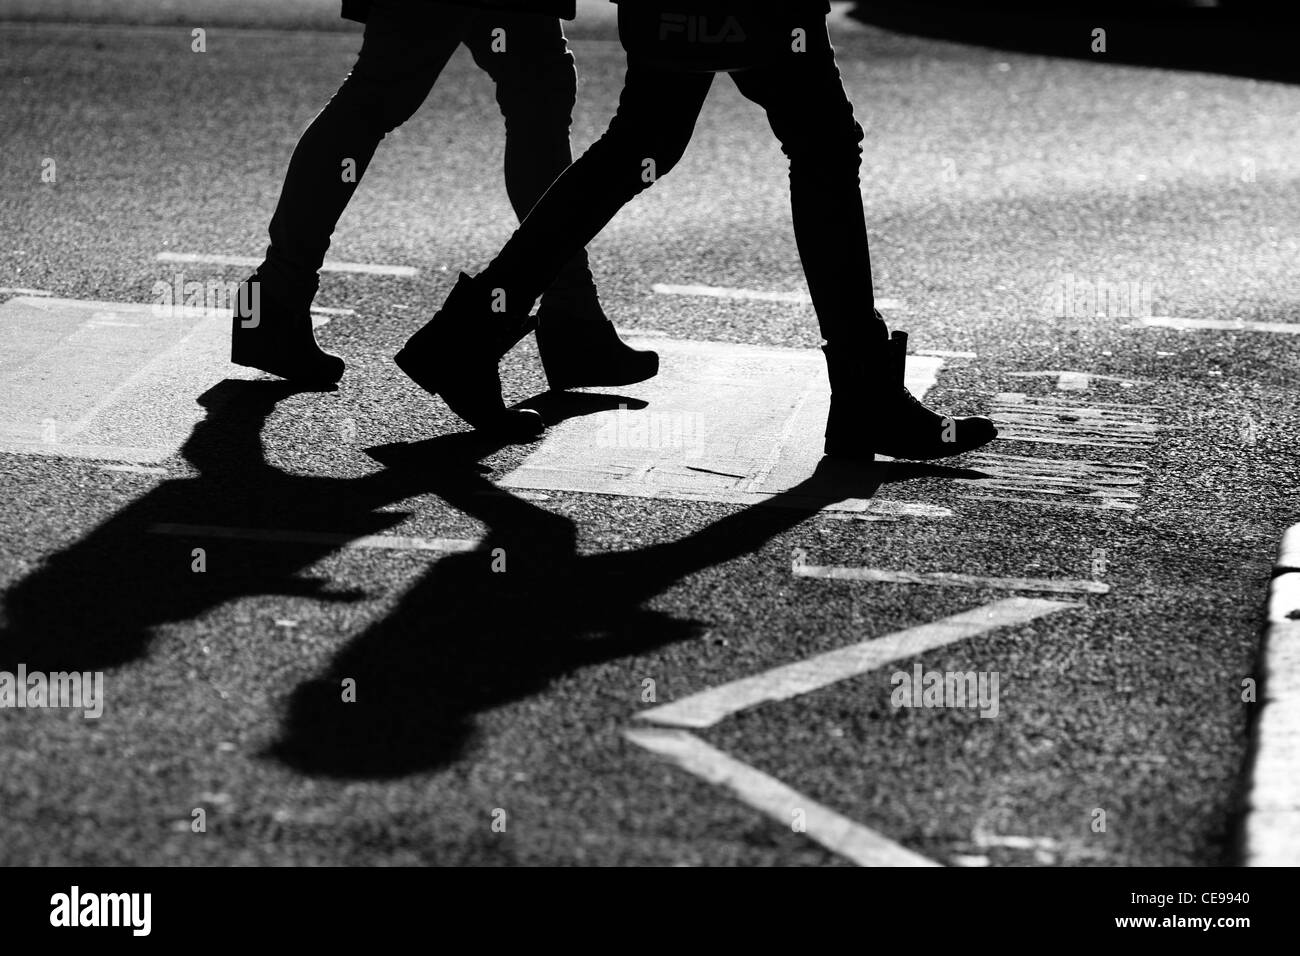 The legs of two females as they cross a road at a zebra crossing in London Stock Photo